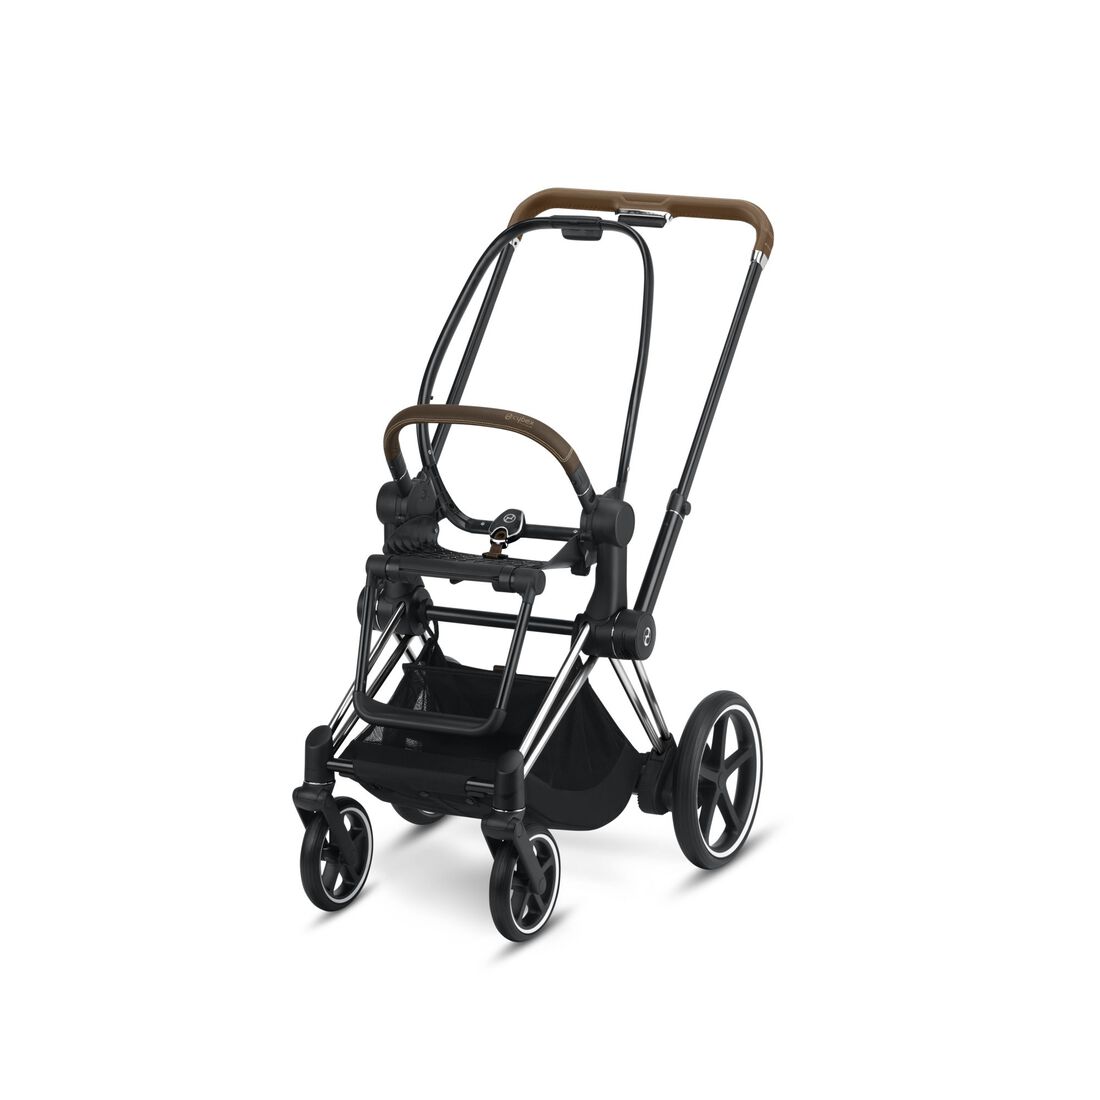 CYBEX Chasis e-Priam 1 - Chrome With Brown Details in Chrome With Brown Details large número de imagen 1